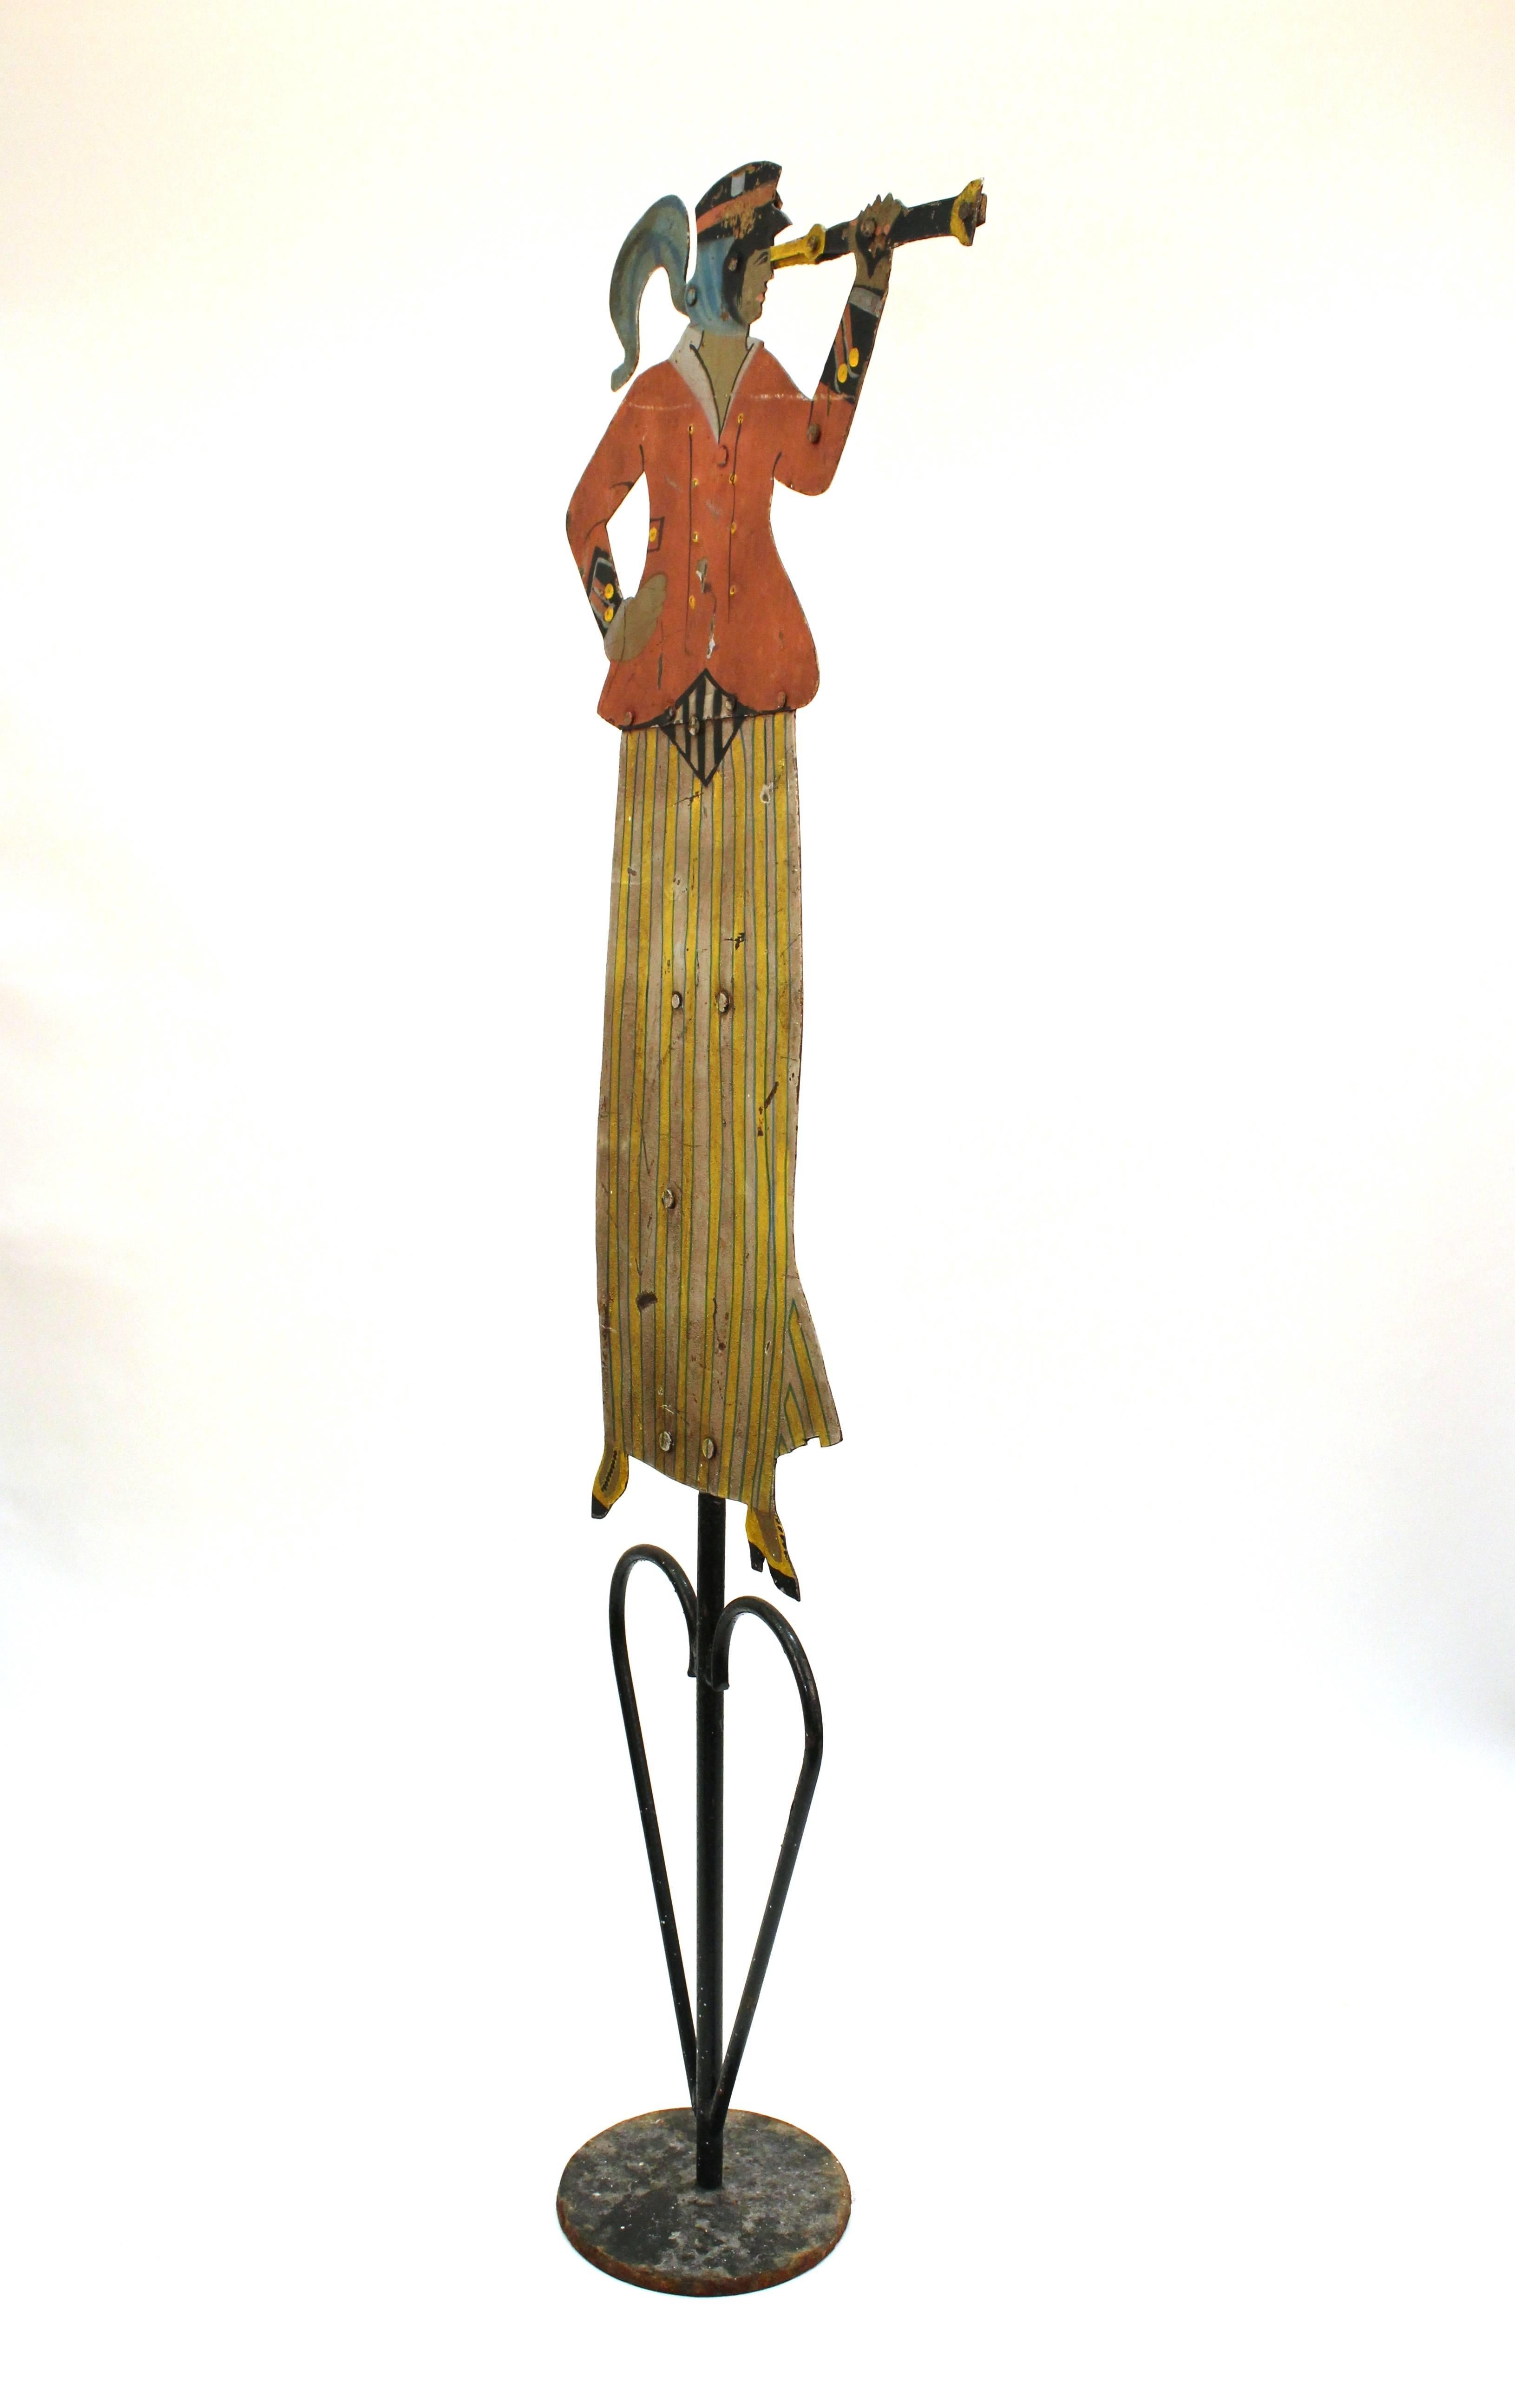 Antique iron weathervane depicting a woman looking through a spyglass. The woman is dressed in early 20th century attire including a yellow striped skirt and red jacket. Includes a wrought iron stand. Age appropriate surface wear but in good